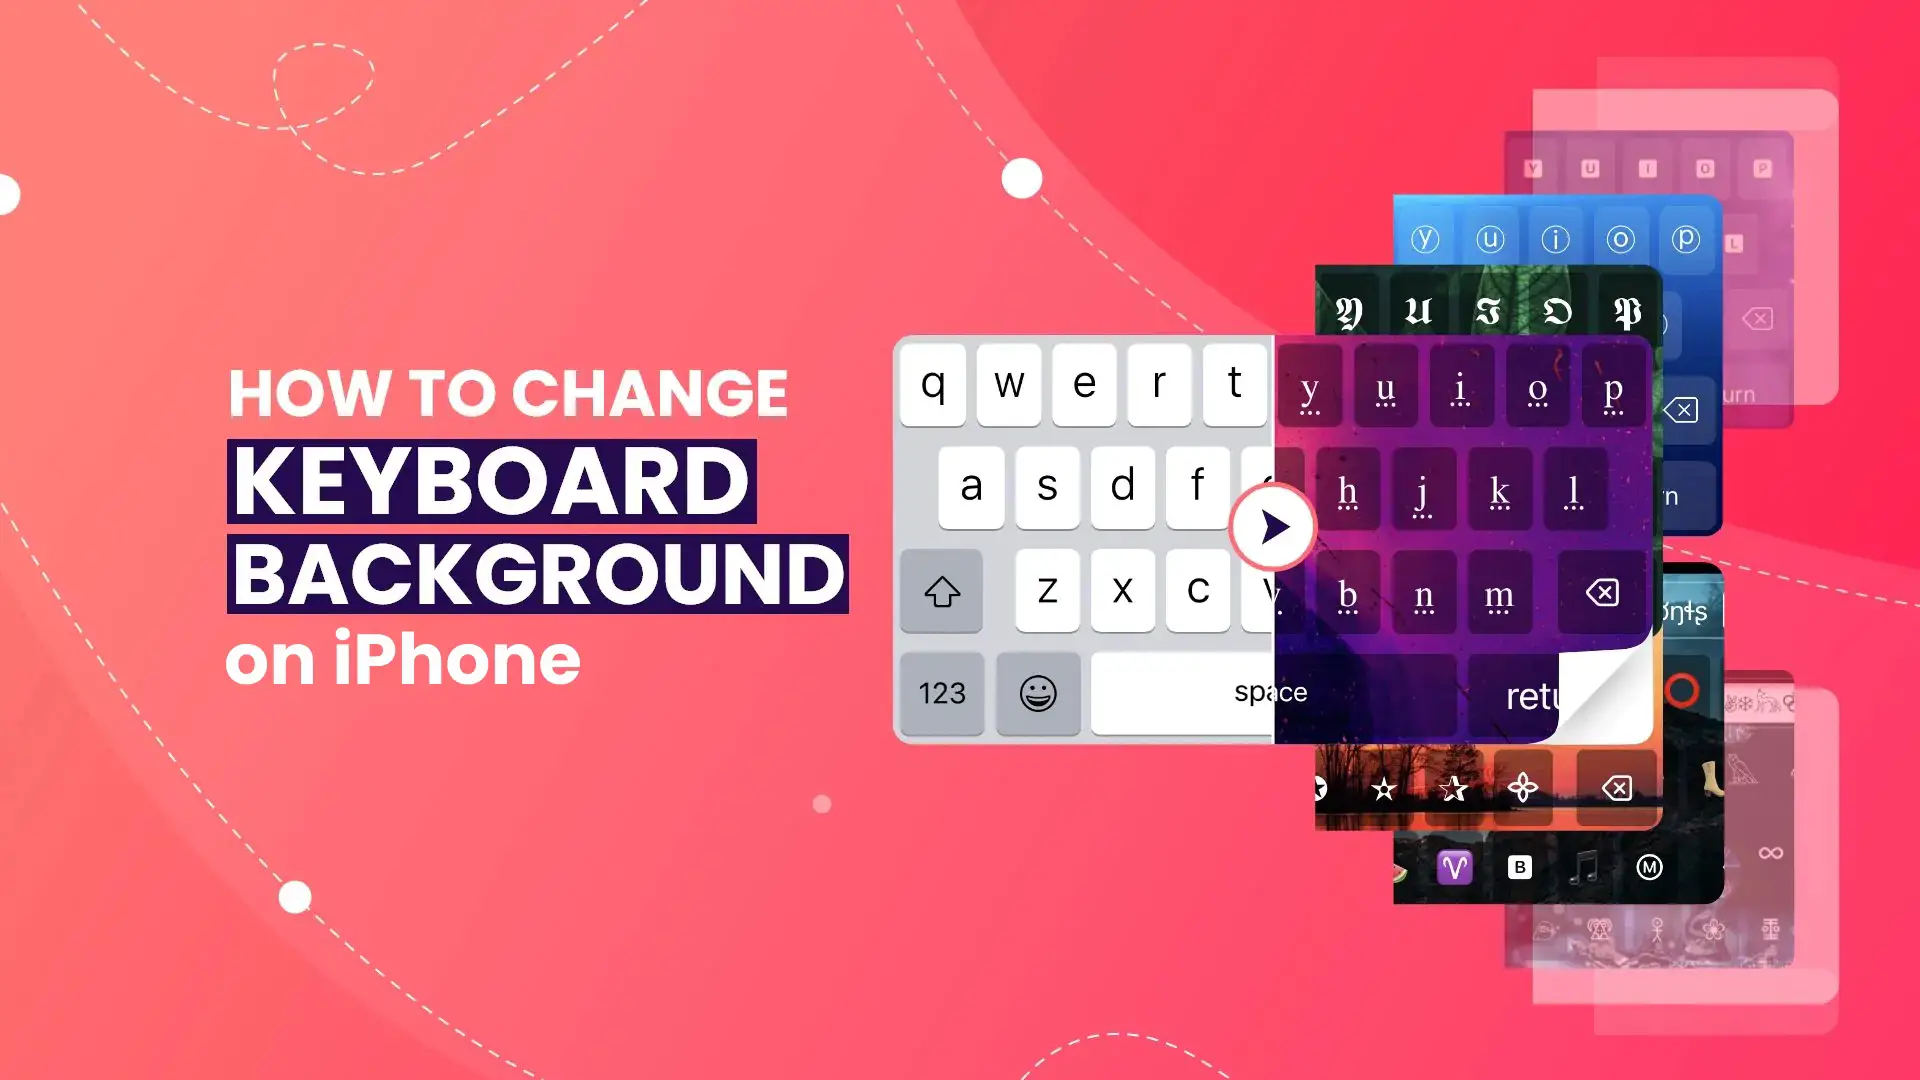 How to Change Keyboard Background on iPhone - A Detailed Guide